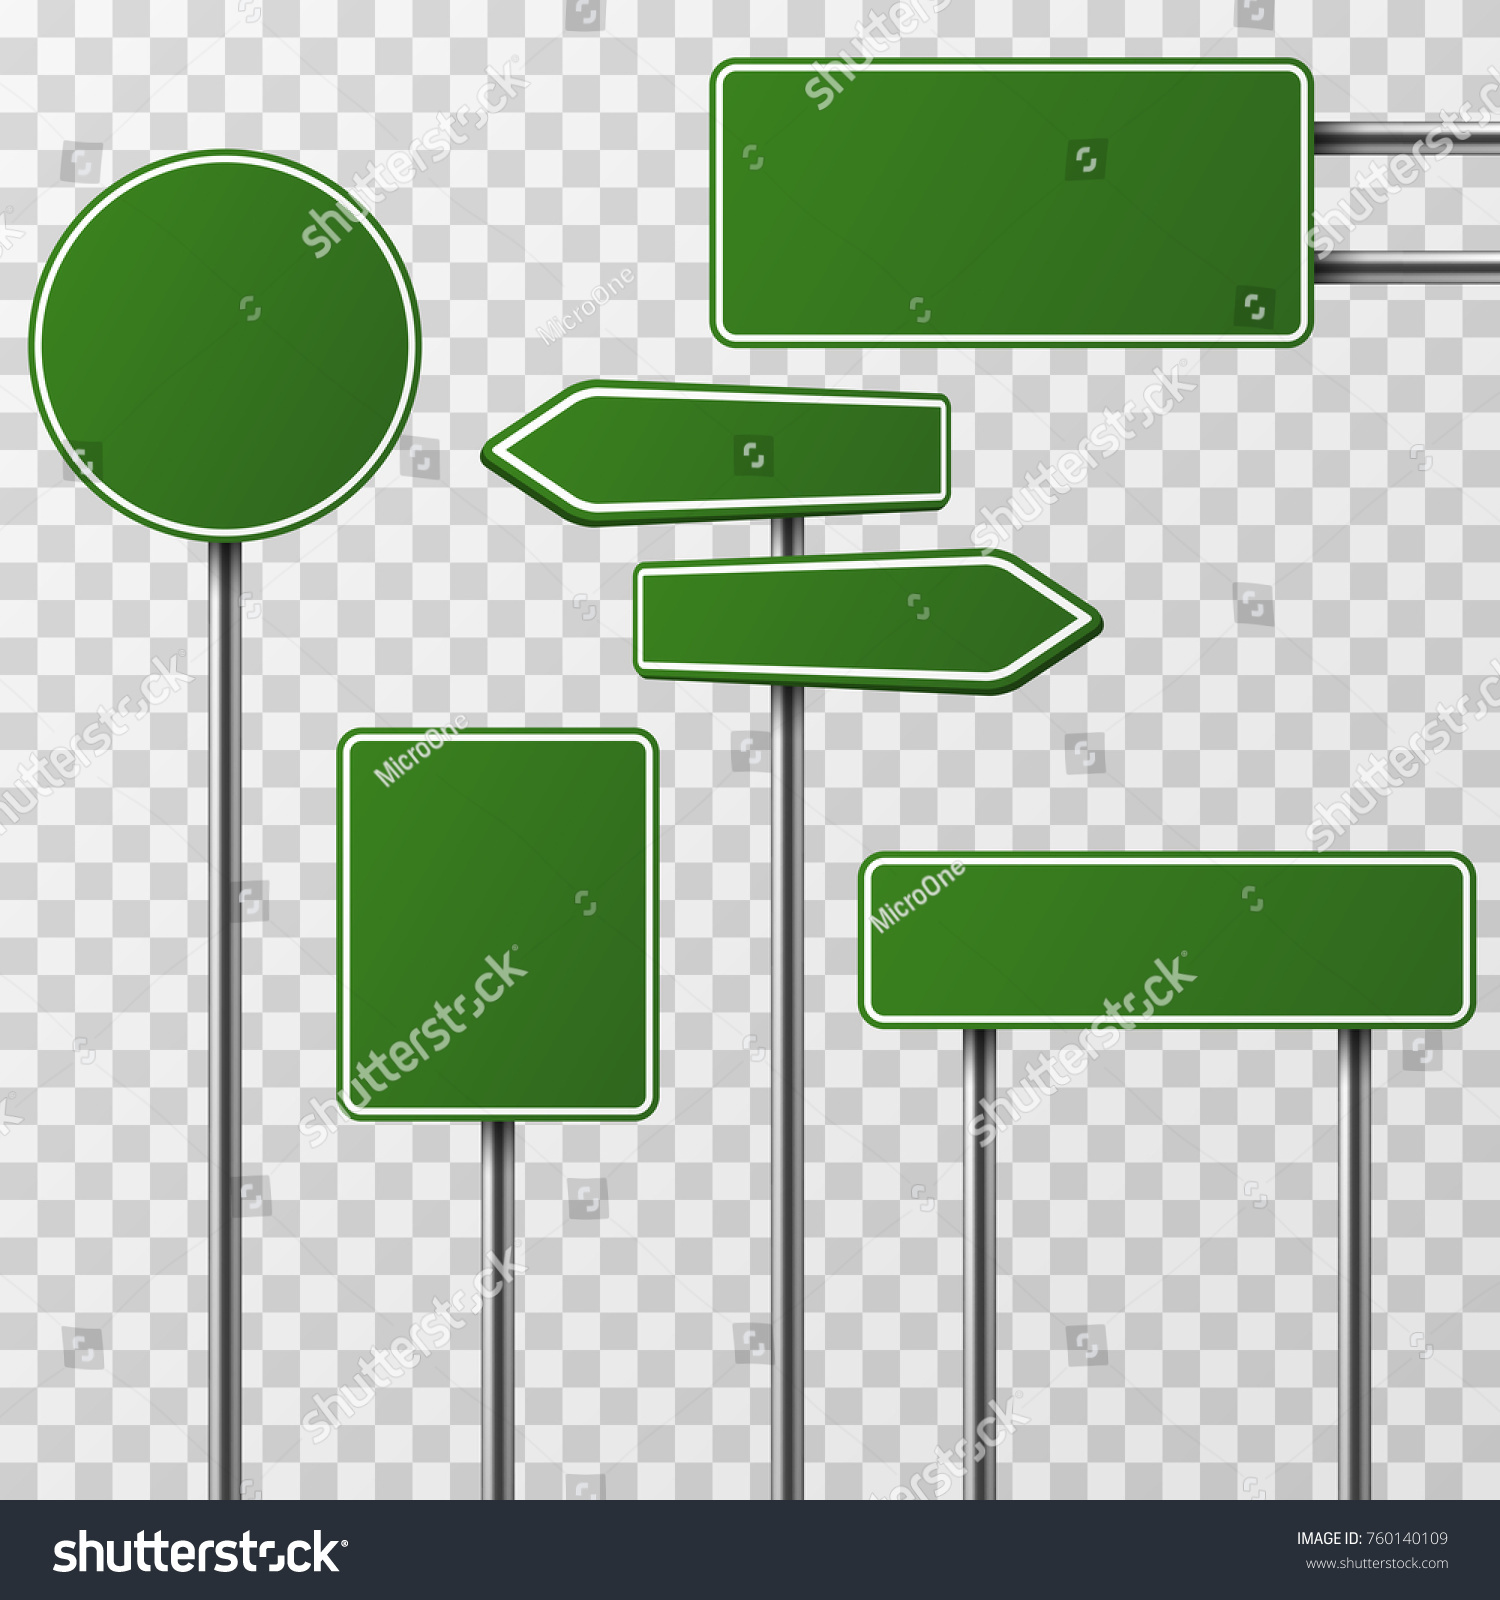 Realistic blank green street and road signs isolated vector. Set of street traffic sign, road signpost direction illustration #760140109